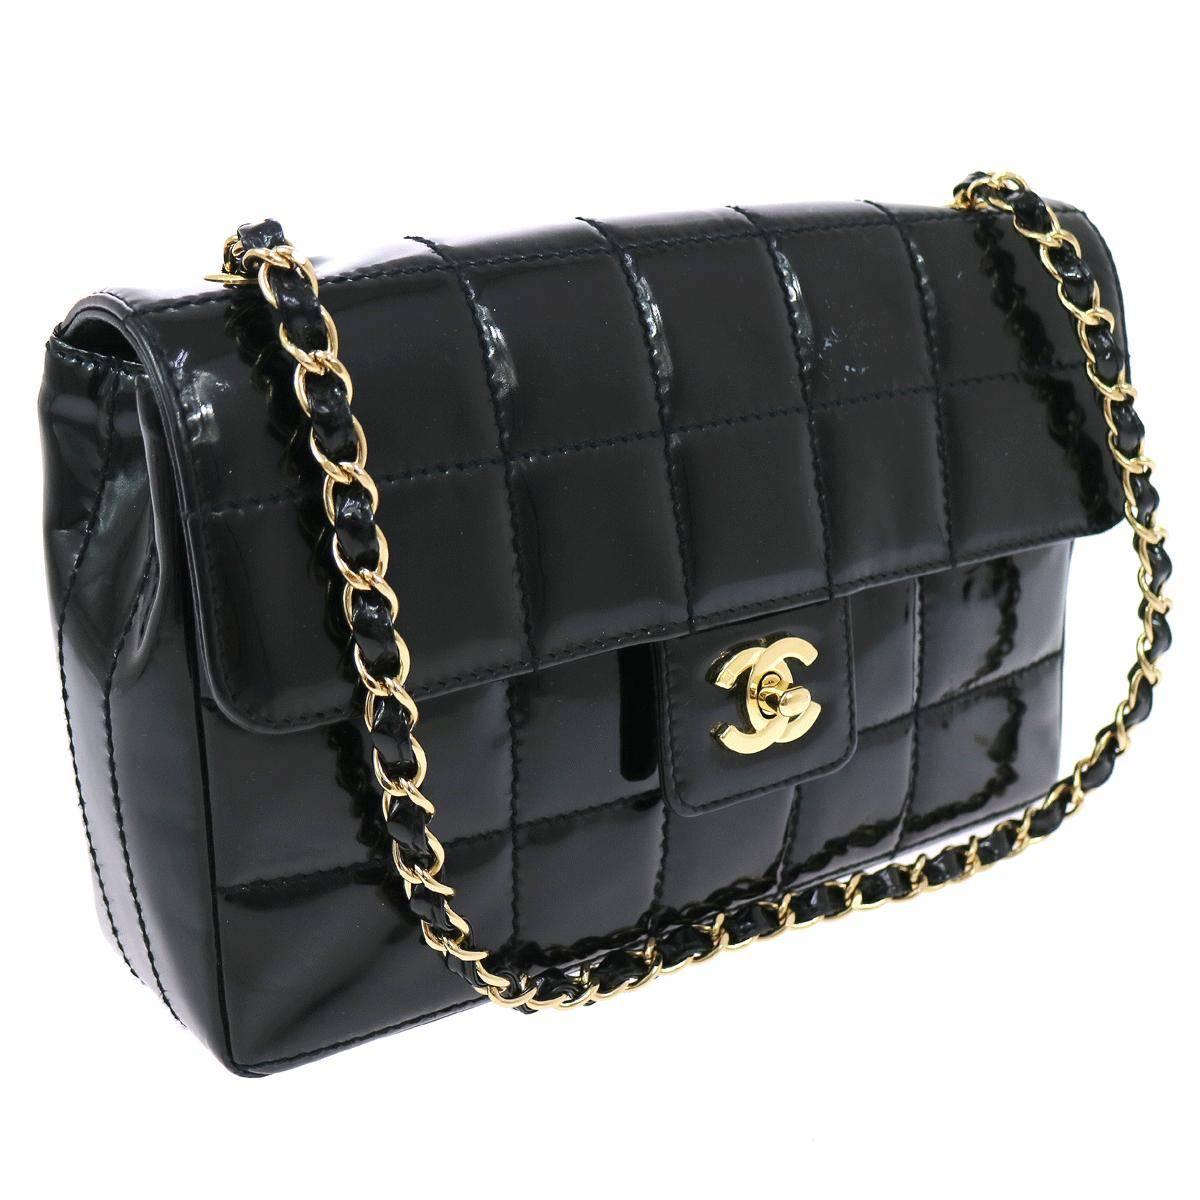 Chanel Black Patent Leather Quilted Chocolate Bar Gold Evening Shoulder Bag